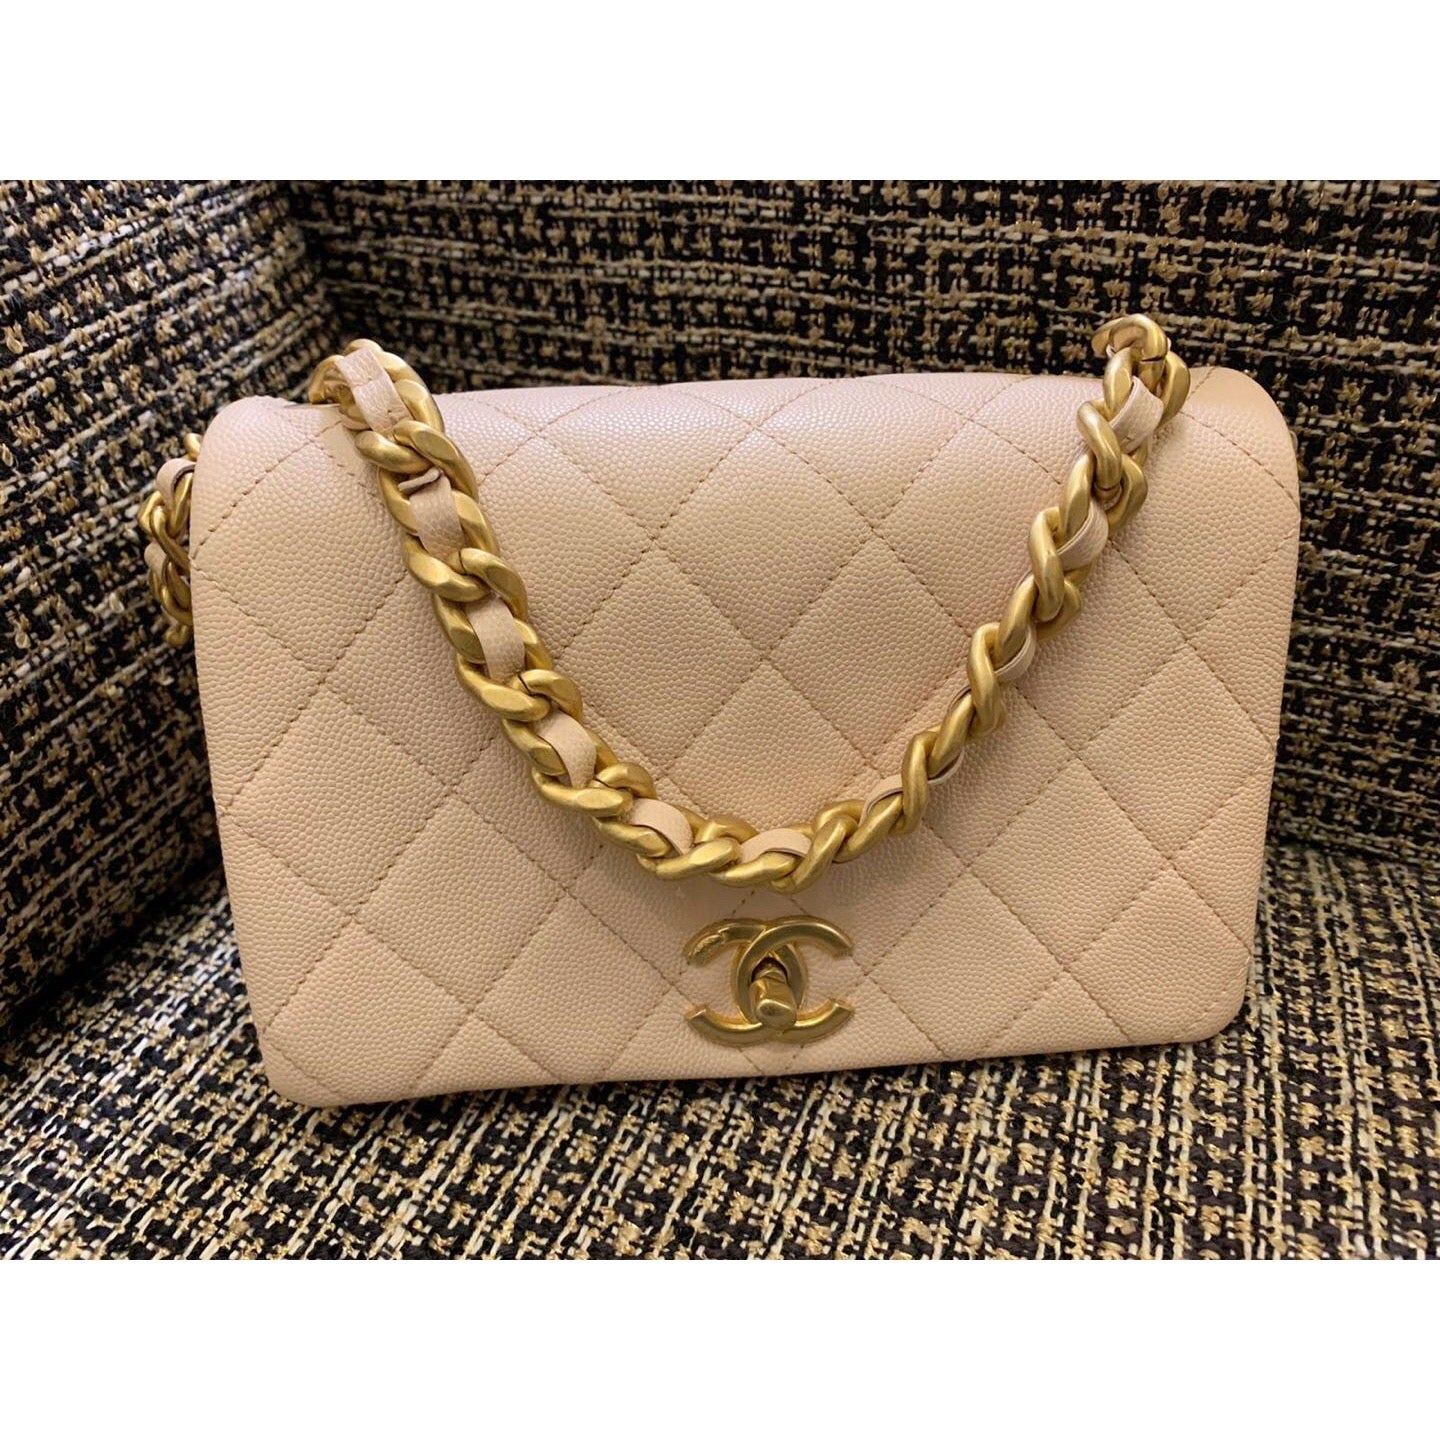 CHANEL 20A Fashion Therapy Small Flap Bag in Rose Clair Caviar GHW